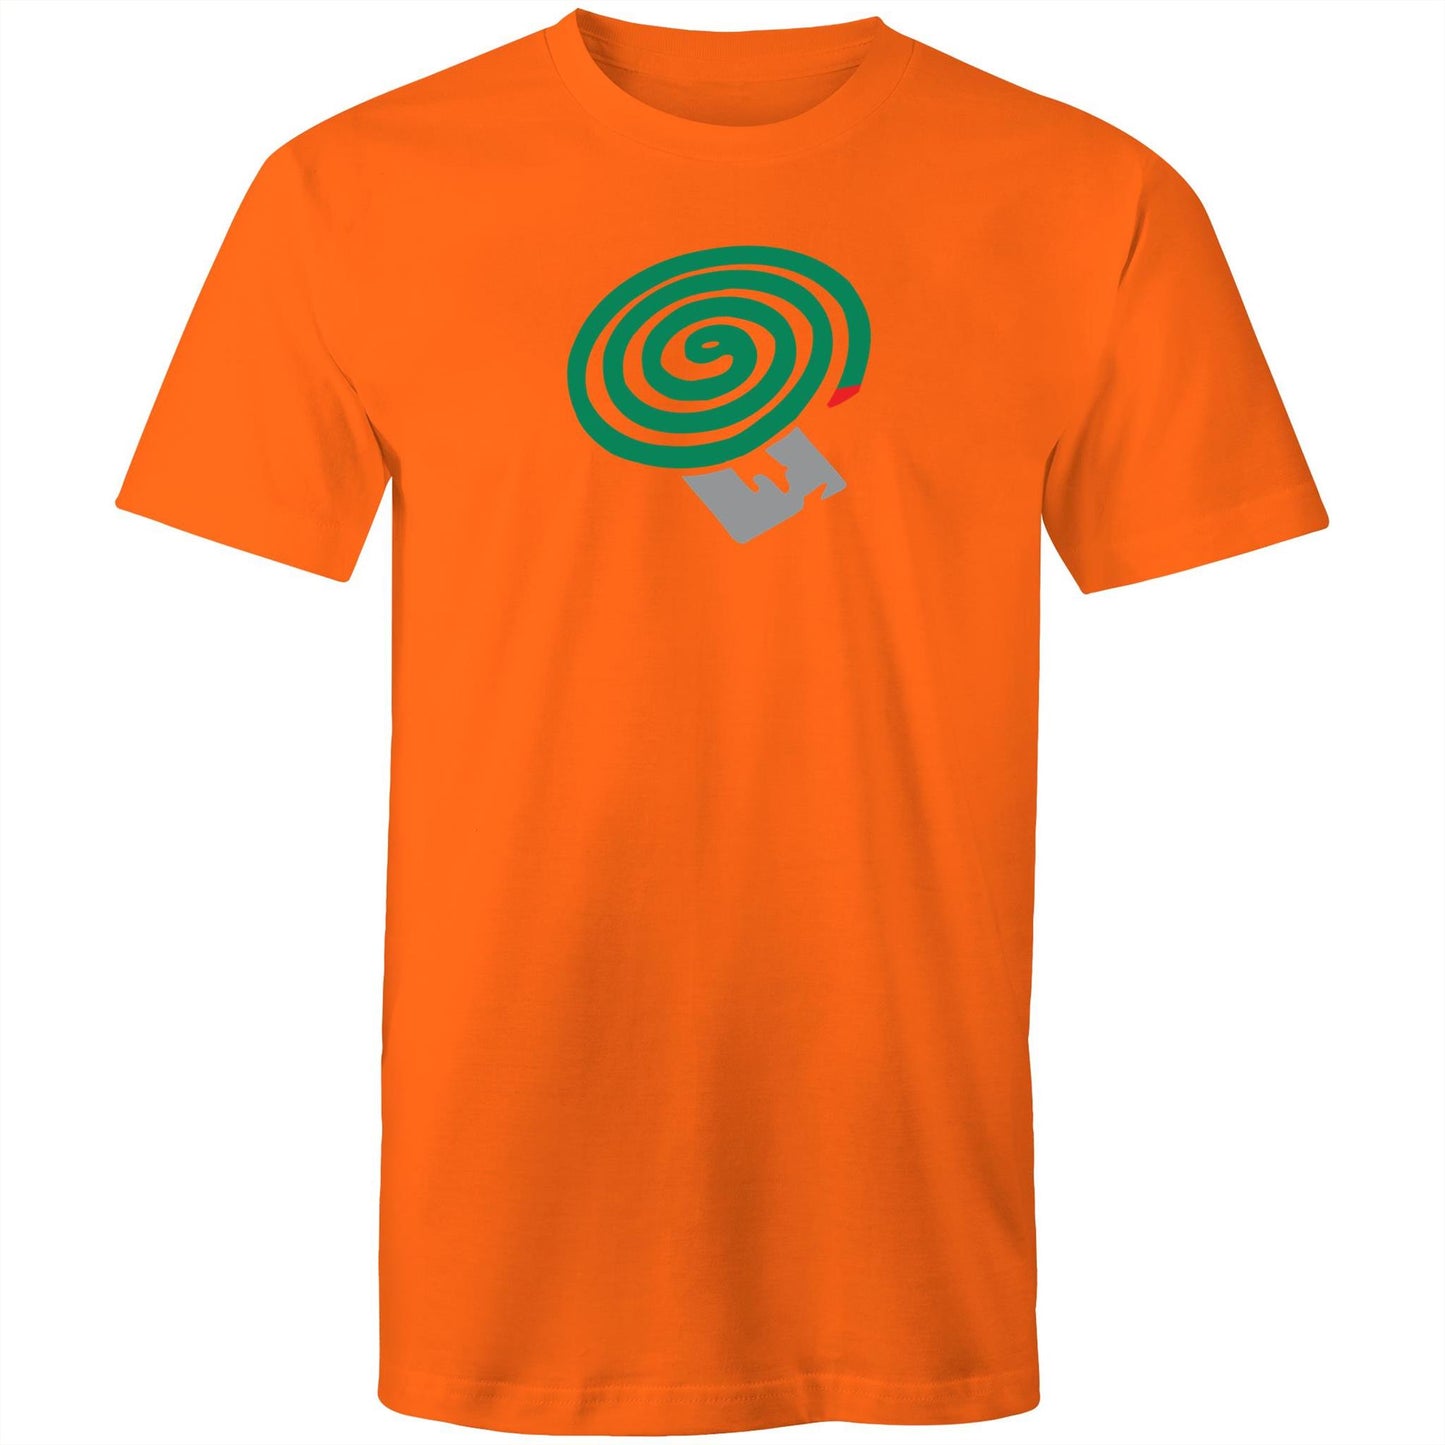 Mosquito Coil T Shirts for Men (Unisex)